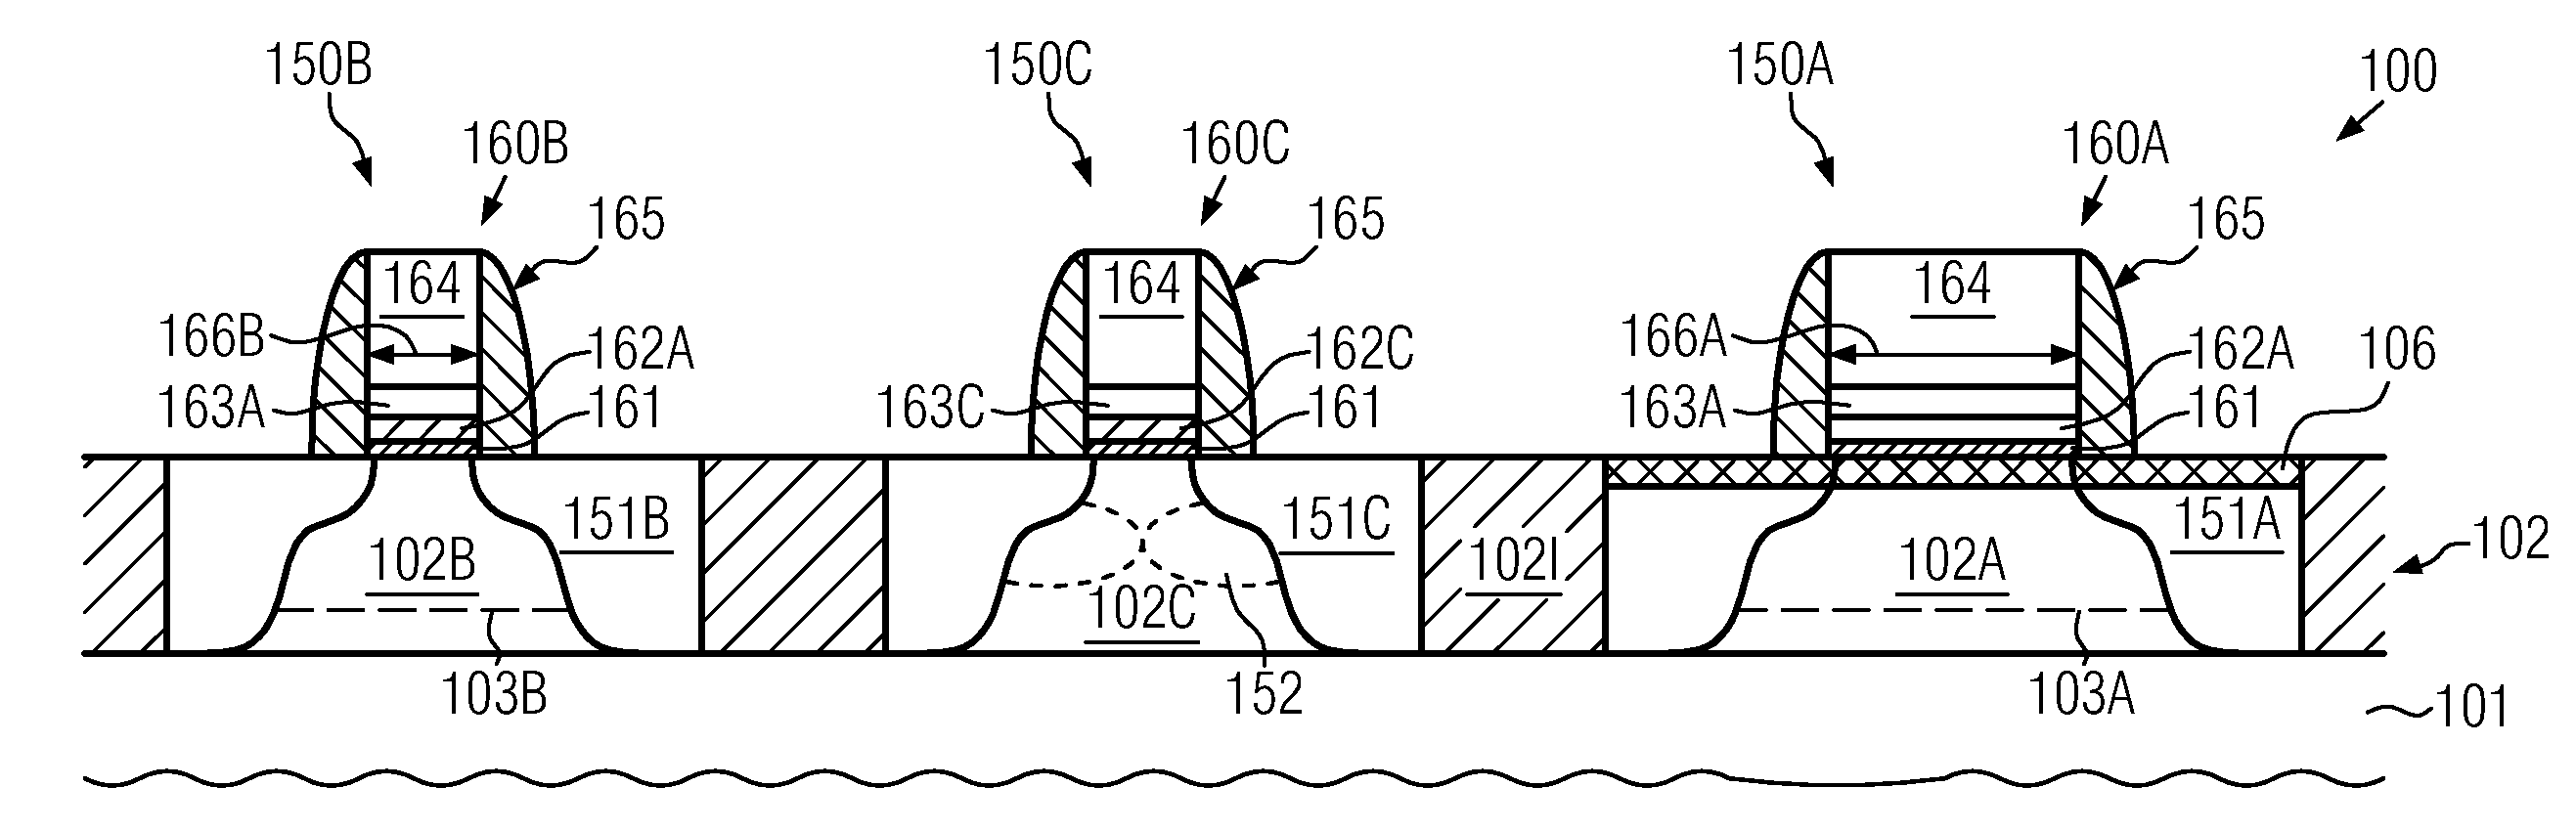 Differential Threshold Voltage Adjustment in PMOS Transistors by Differential Formation of a Channel Semiconductor Material